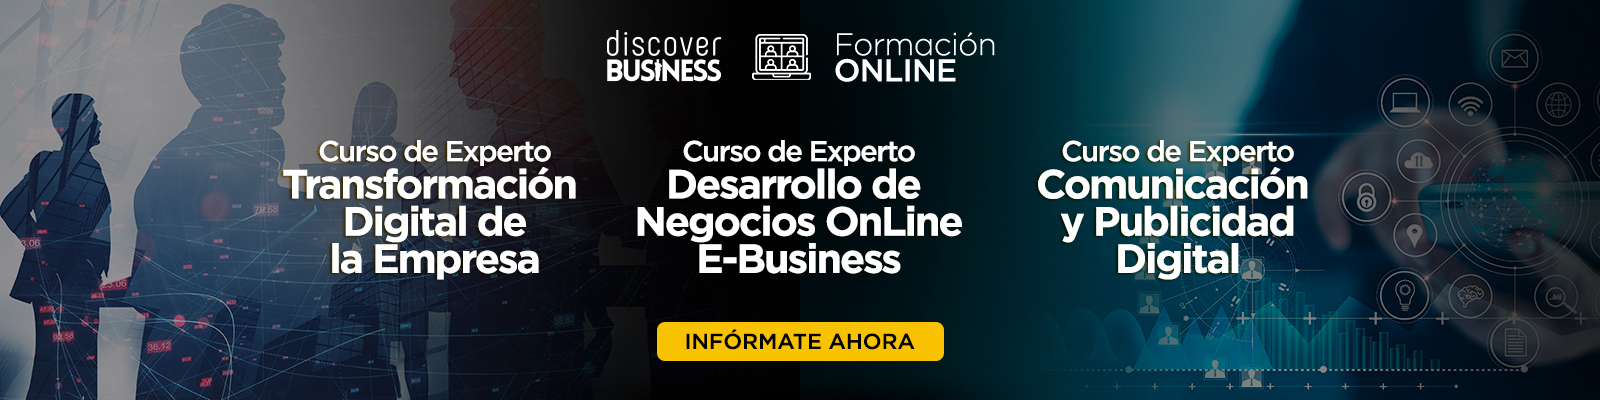 FP Online | Discover Business